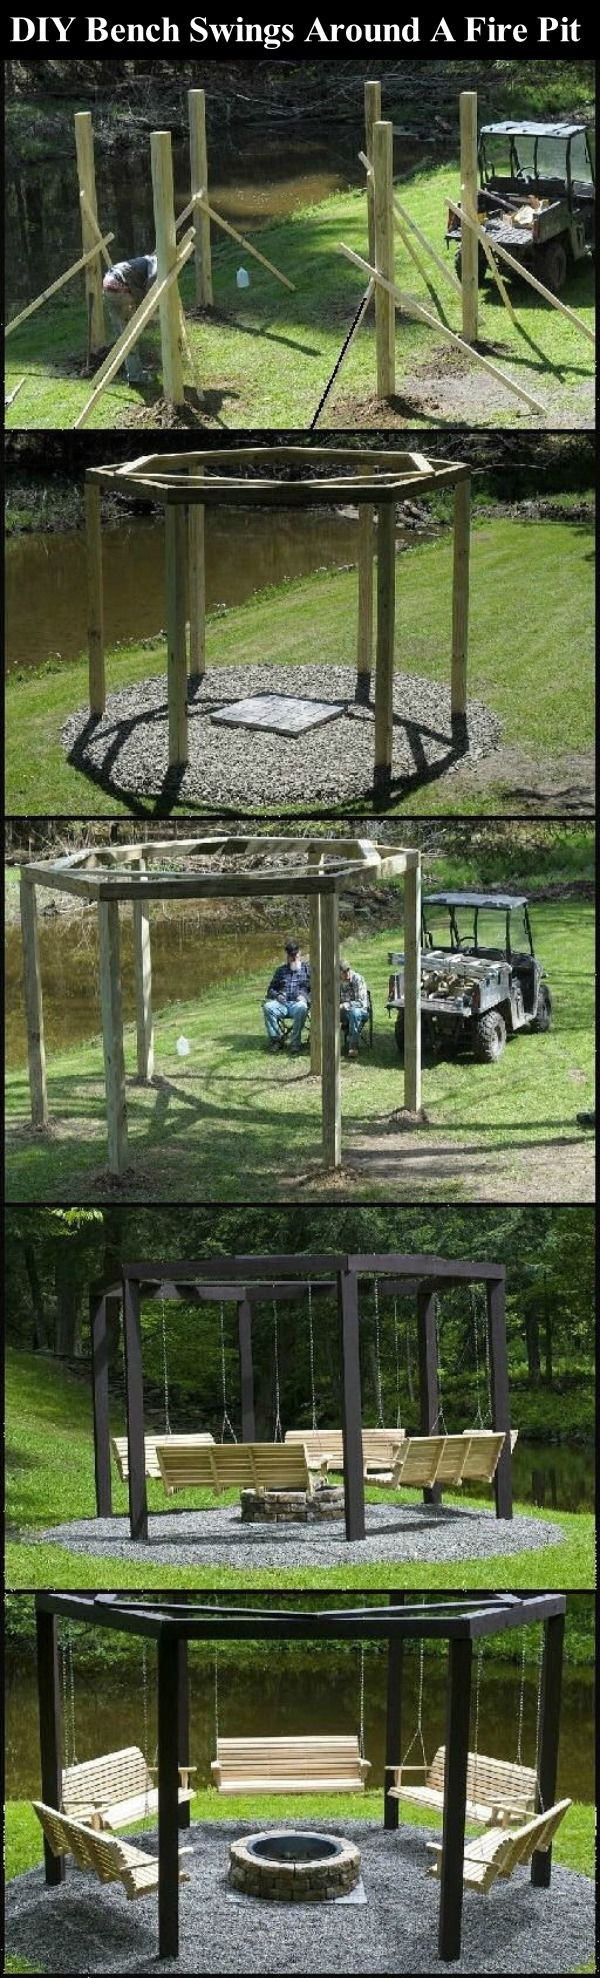 Swinging Bench Fire Pit
 DIY Bench Swings Around A Fire Pit s and